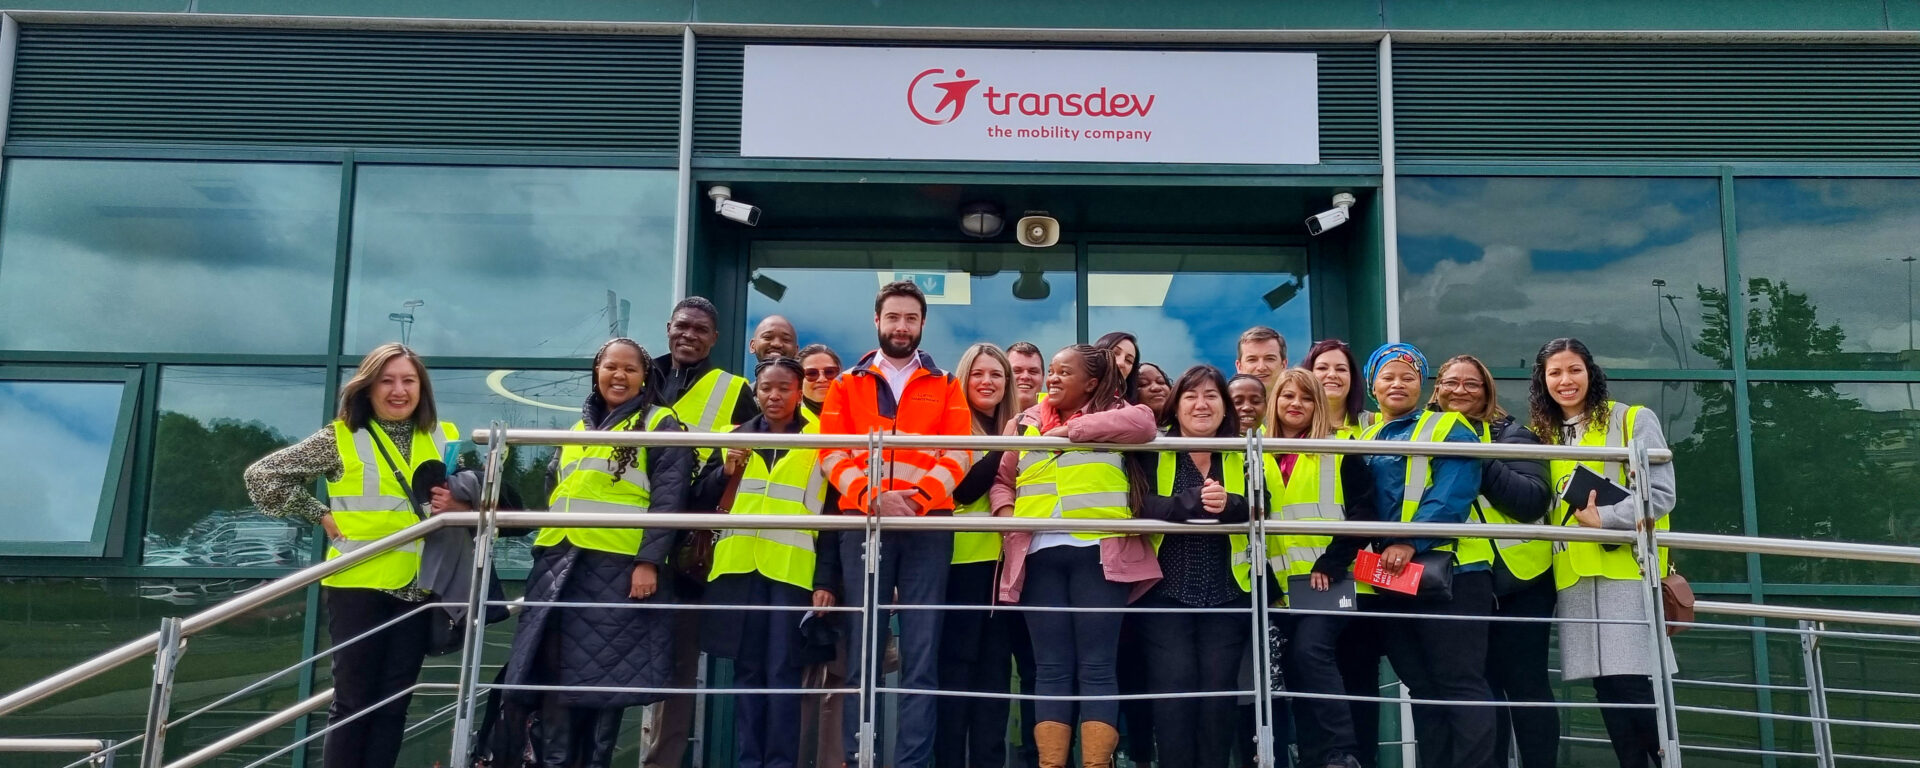 Female delegation from the South African Transport Education Training Authority visits Transdev in Ireland